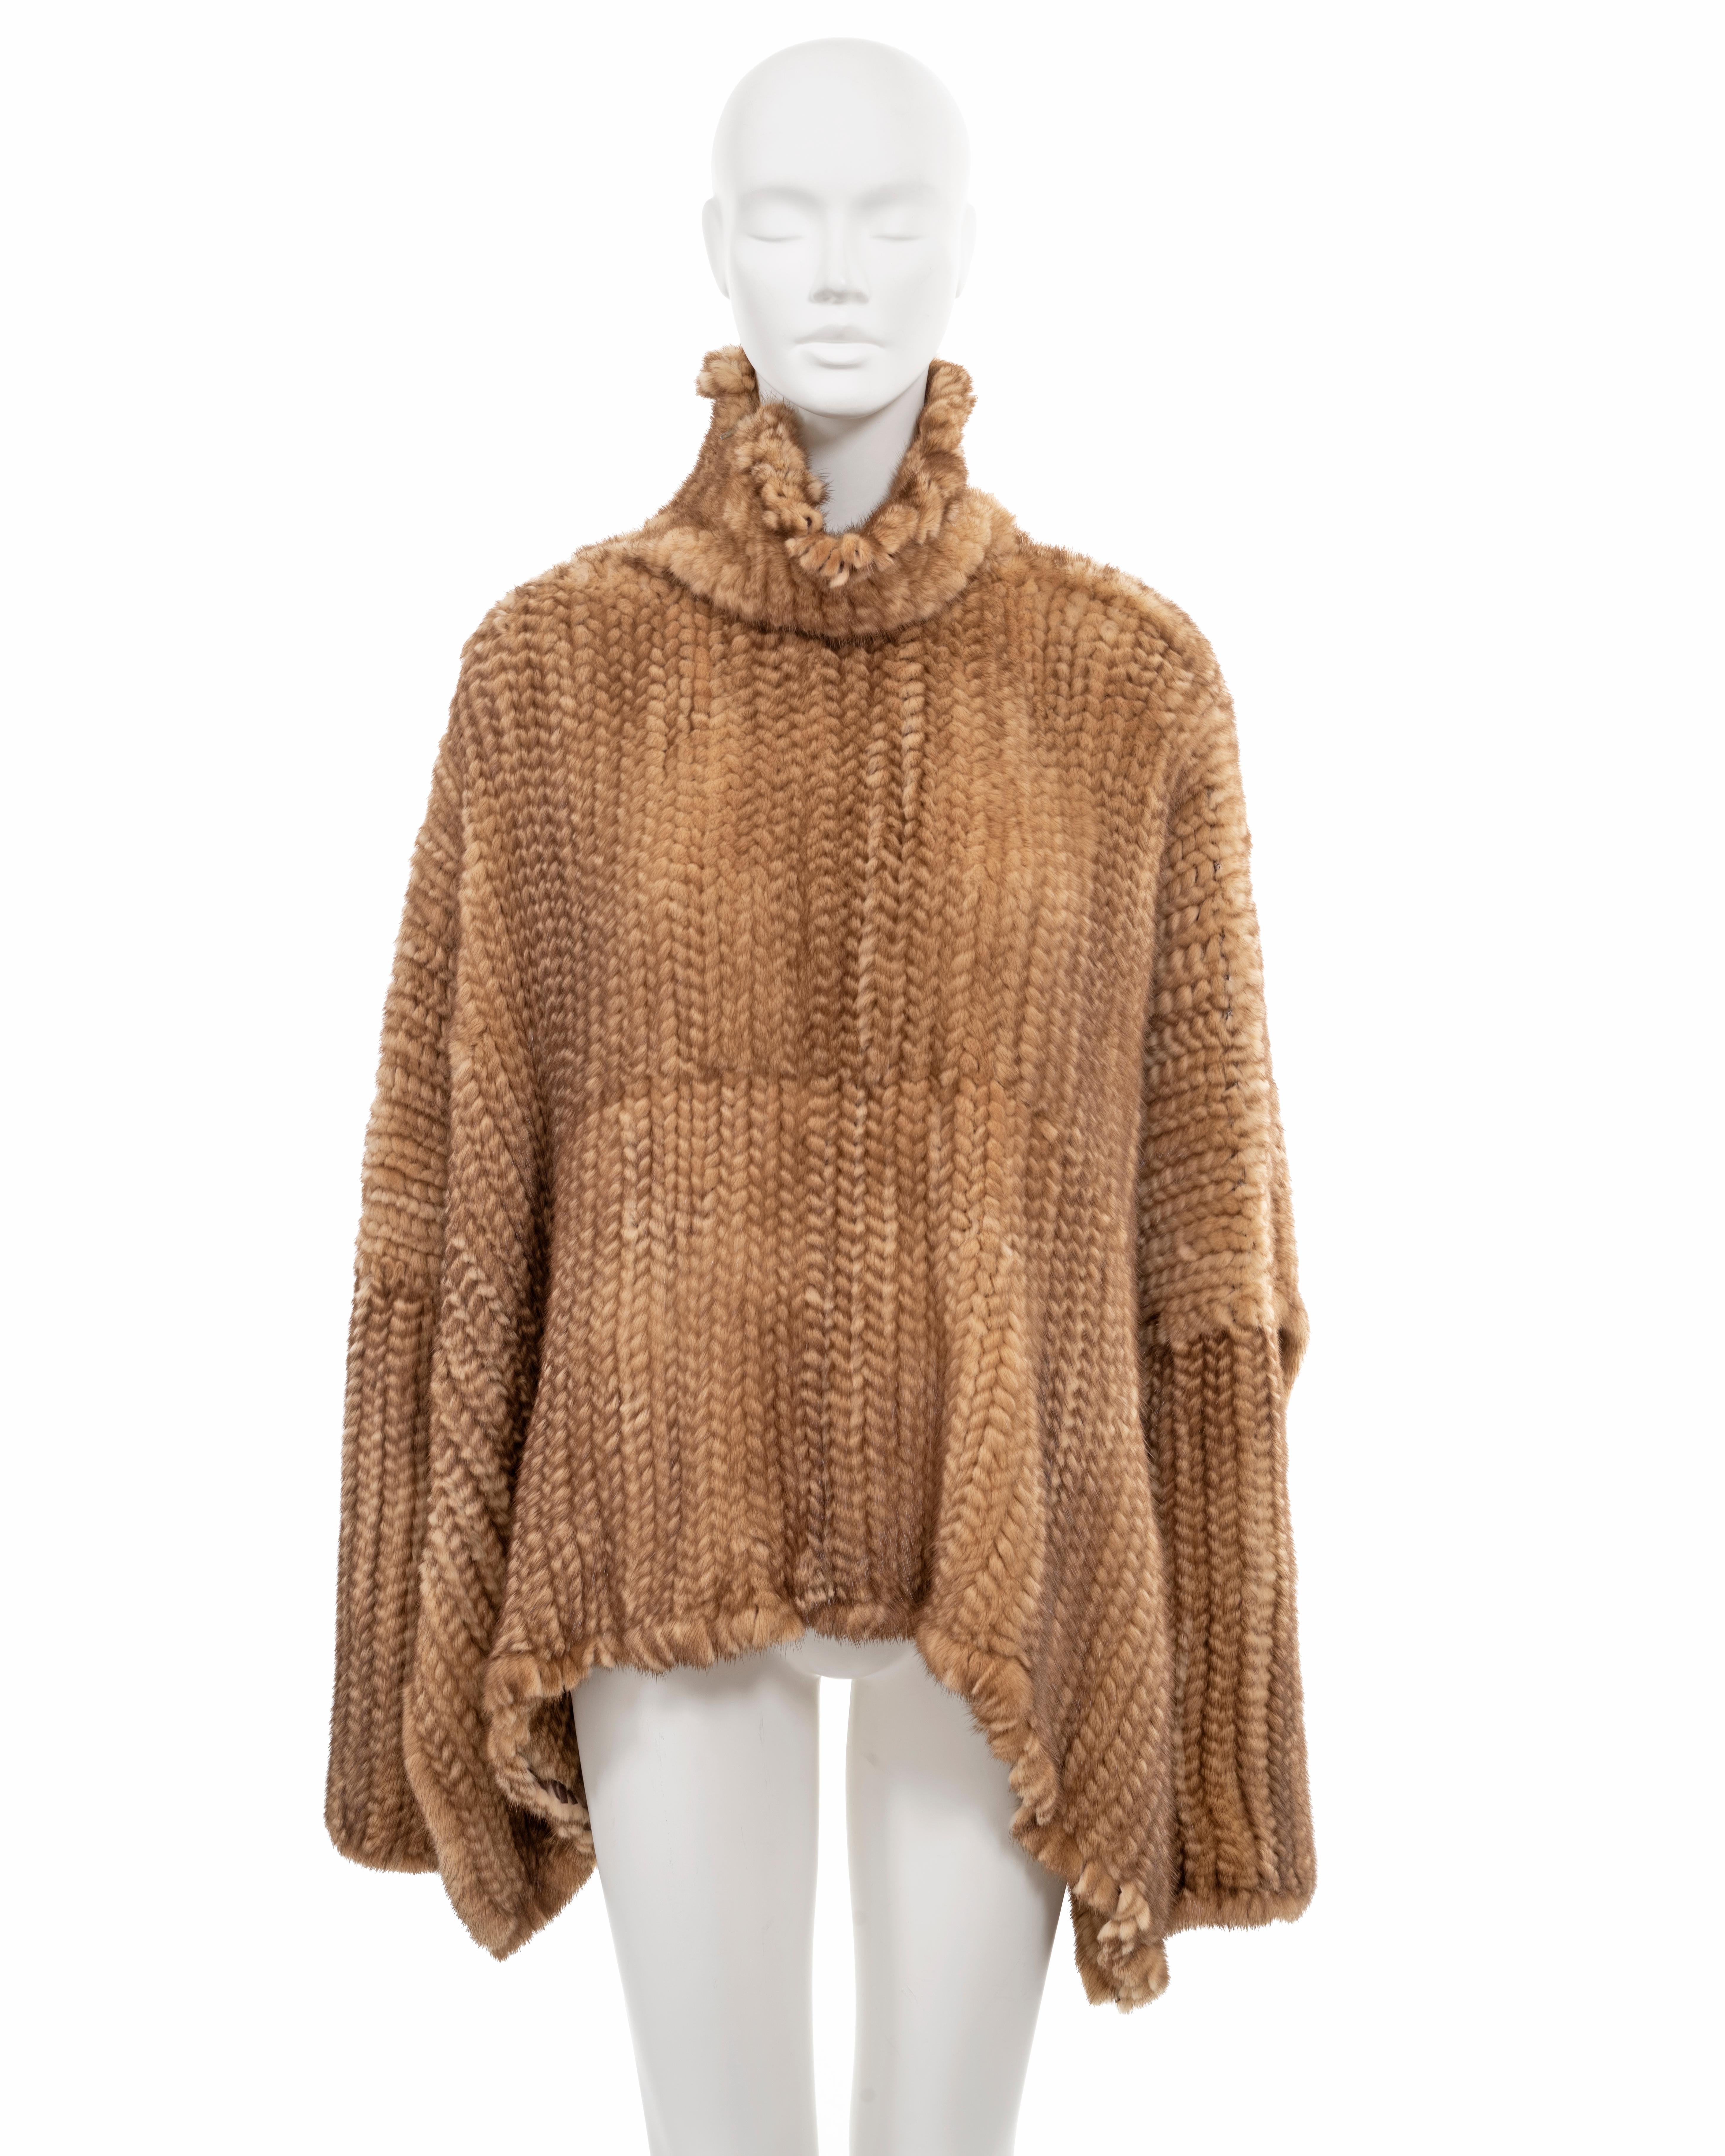 ▪ Christian Dior fur sweater
▪ Creative Director: John Galliano
▪ Fall-Winter 2000
▪ Constructed from knitted mink fur ribbons 
▪ Fringed trim 
▪ Wide cut 
▪ Oversized fit 
▪ High-low hemline 
▪ One Size
▪ Made in France  

All photographs in this